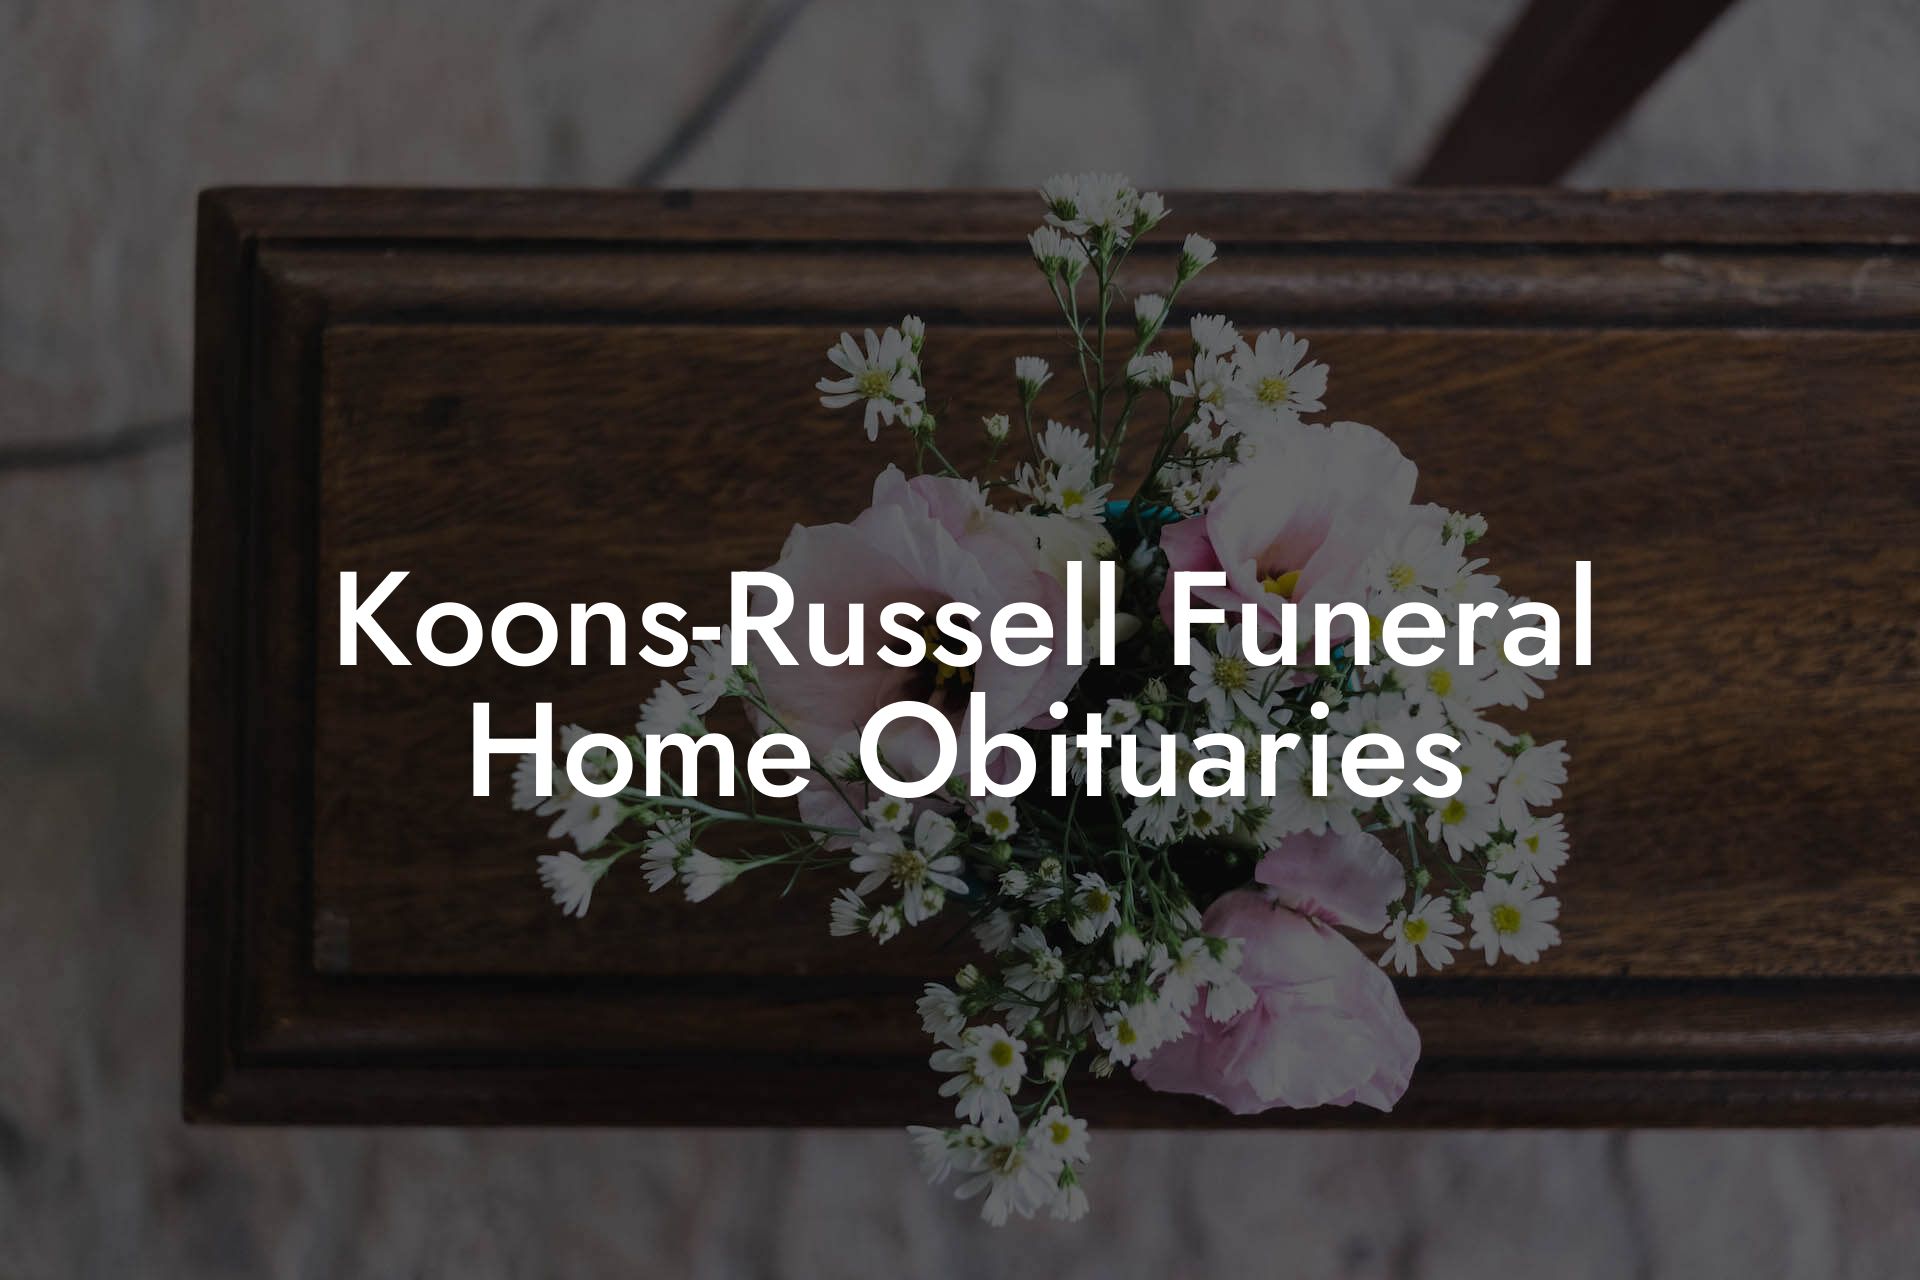 Koons-Russell Funeral Home Obituaries